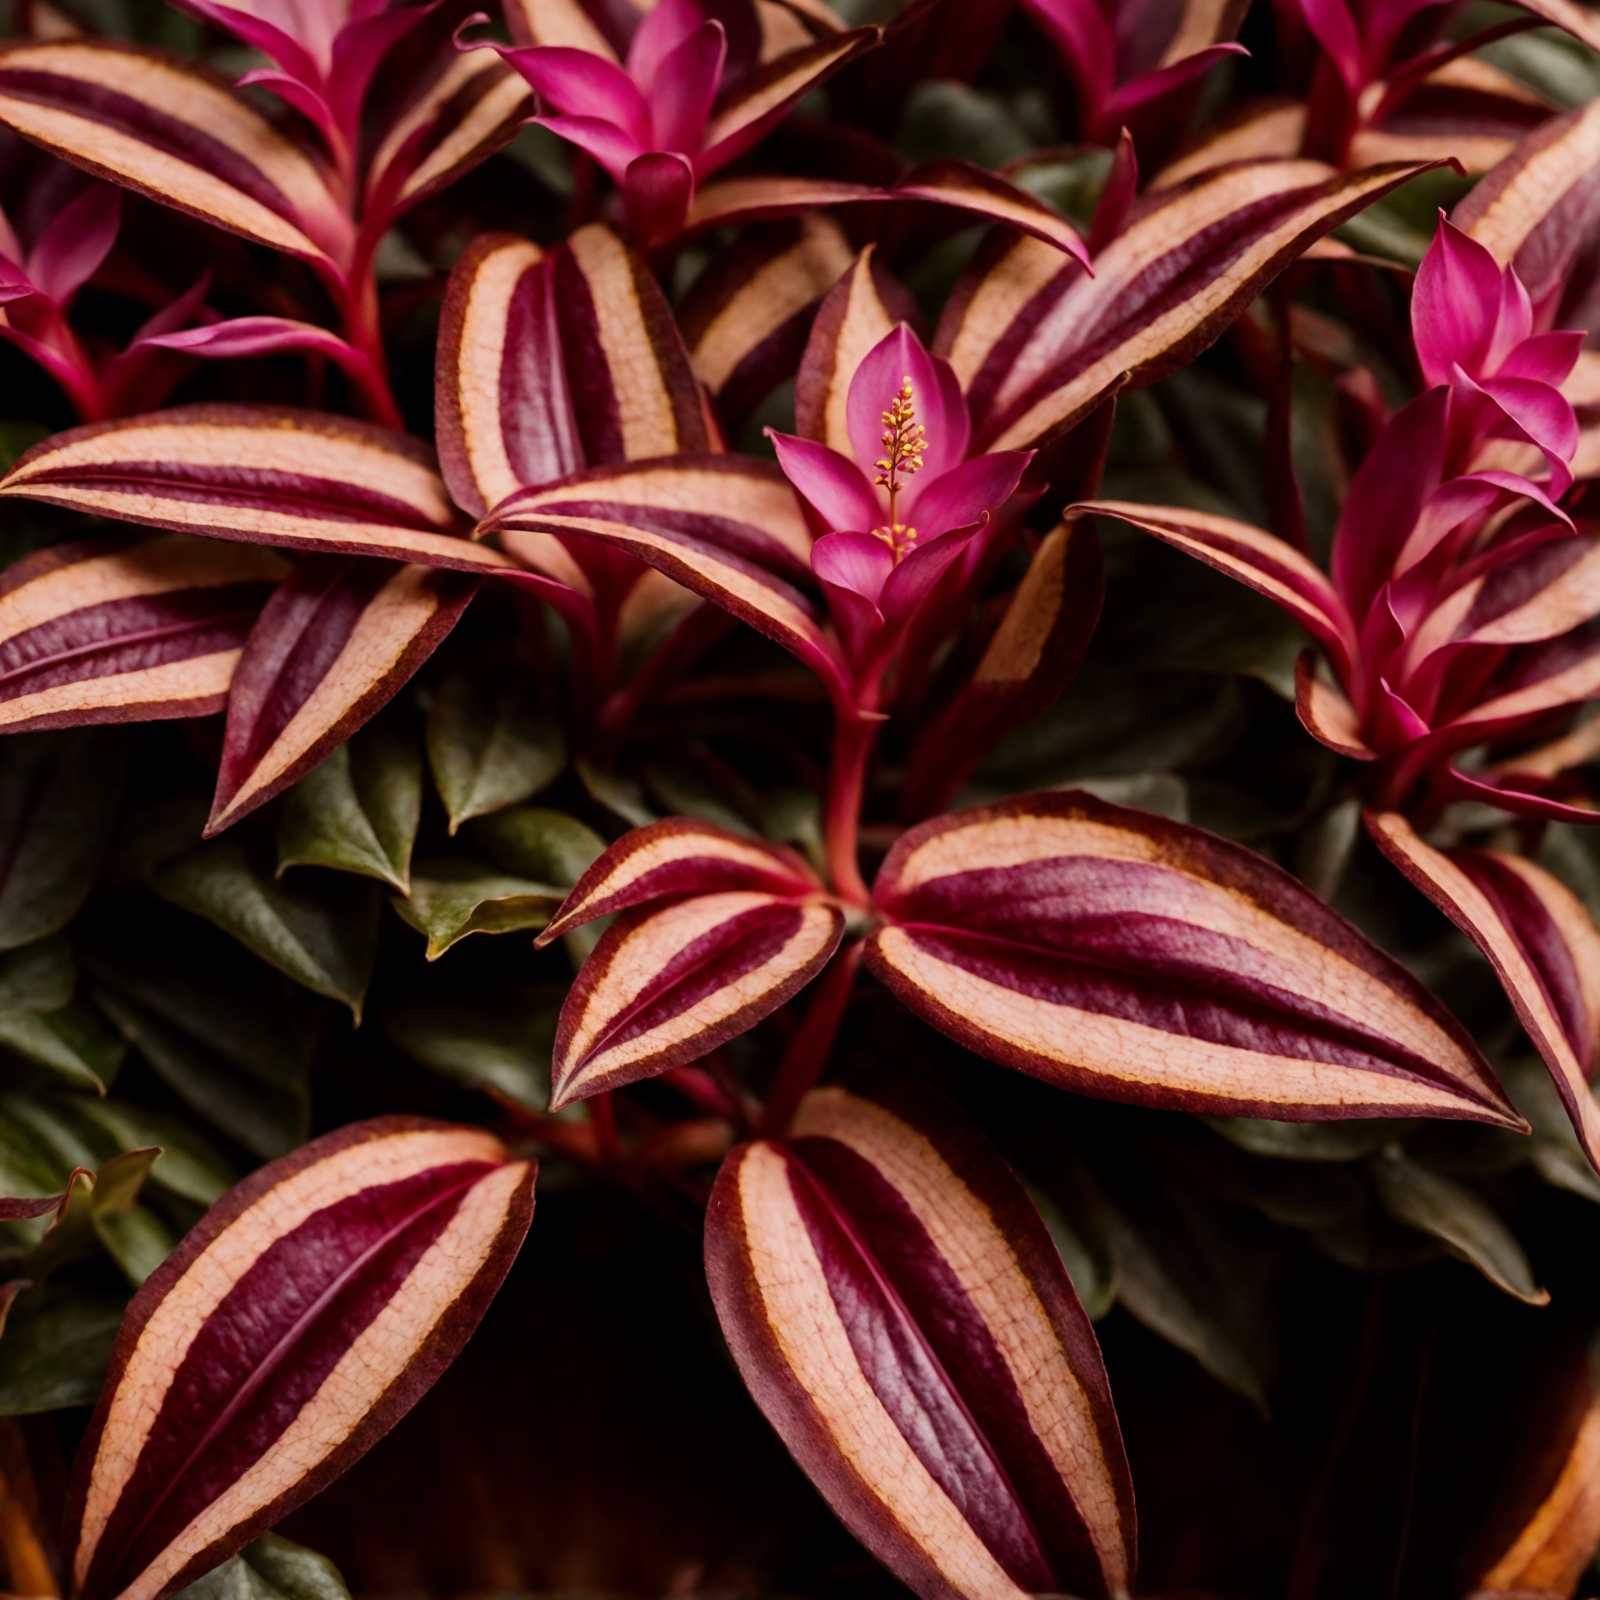 Tradescantia zebrina with pink blooms and variegated leaves, in a planter against a dark background.